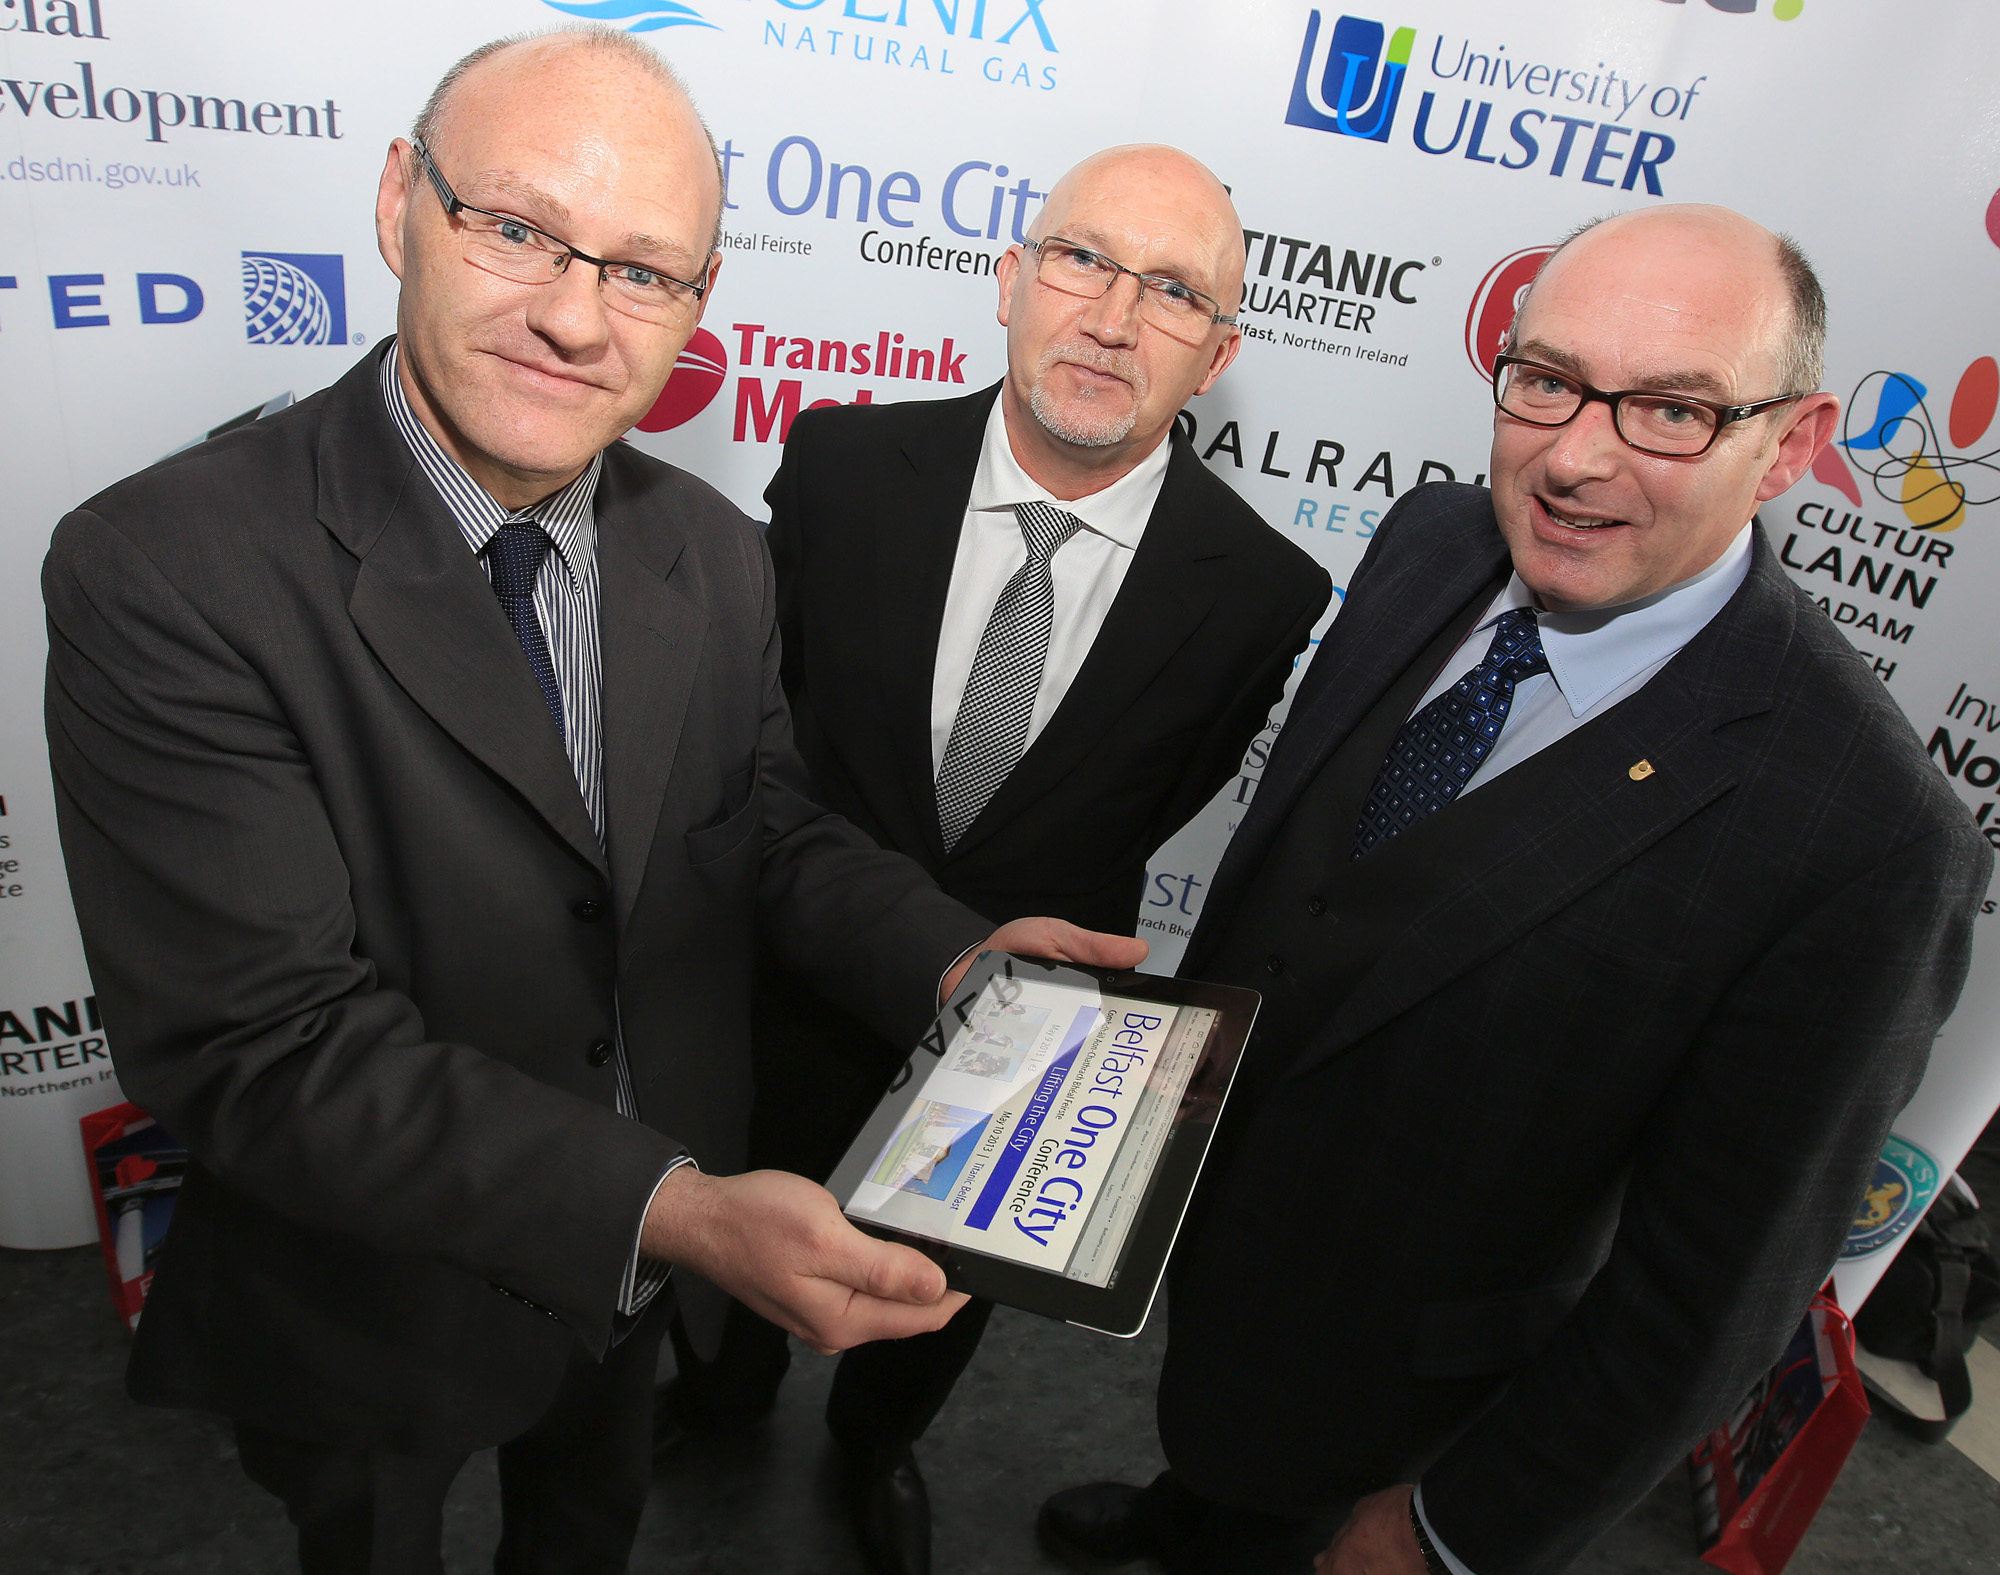 Belfast MET E3, One City Conference 'Lifting the City' . pictured: Paul Maskey MP, Bill Shaw (174 Trust) and John D'Arcy (Open University) 95JC13